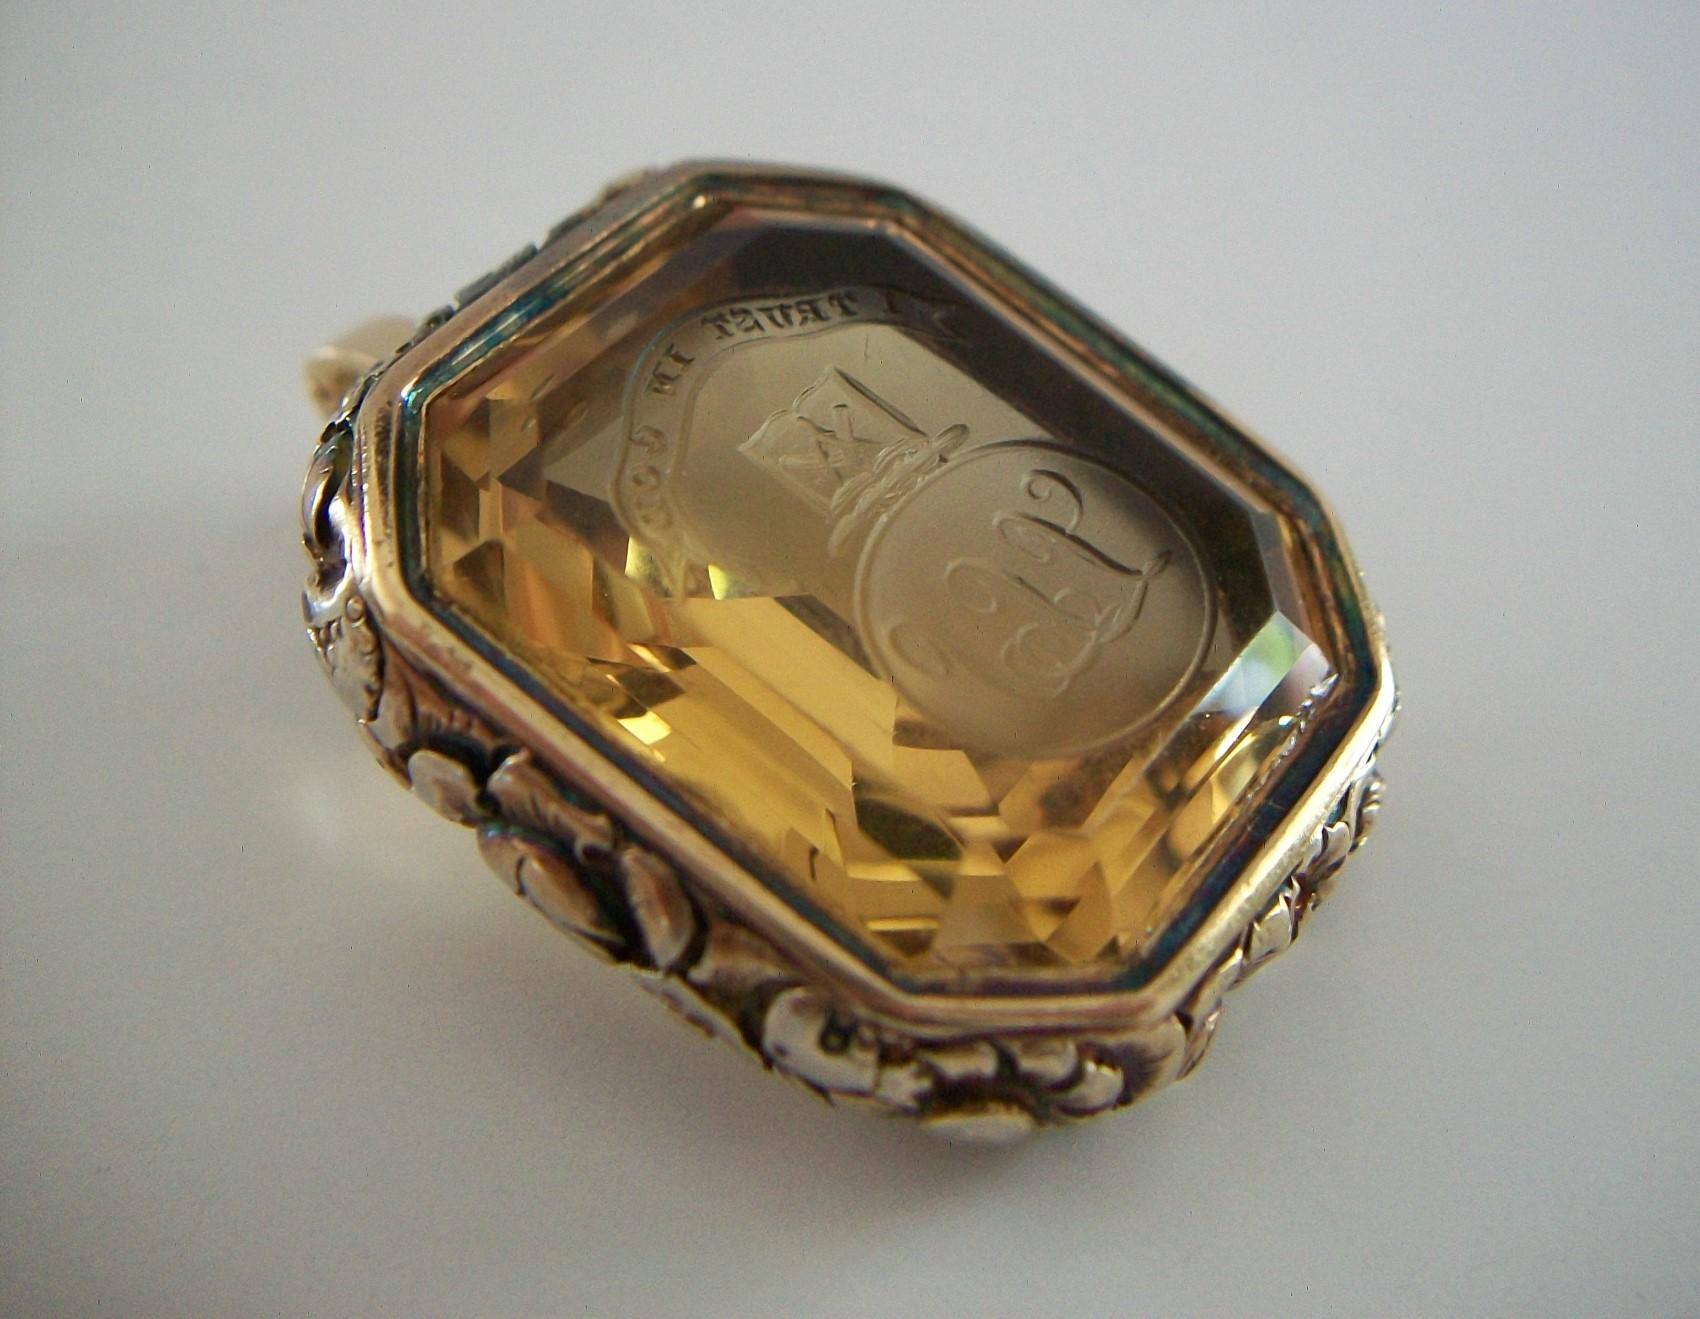 Exceptional Georgian carved Citrine Fob / Pendant / Enhancer - featuring a large Emerald cut yellow Citrine (approx. 56.19 Total Carat Weight - 23 mm. Wide x 28 mm. Long x 13 mm. Deep) - the Citrine carved in reverse with the motto 'I Trust in God'